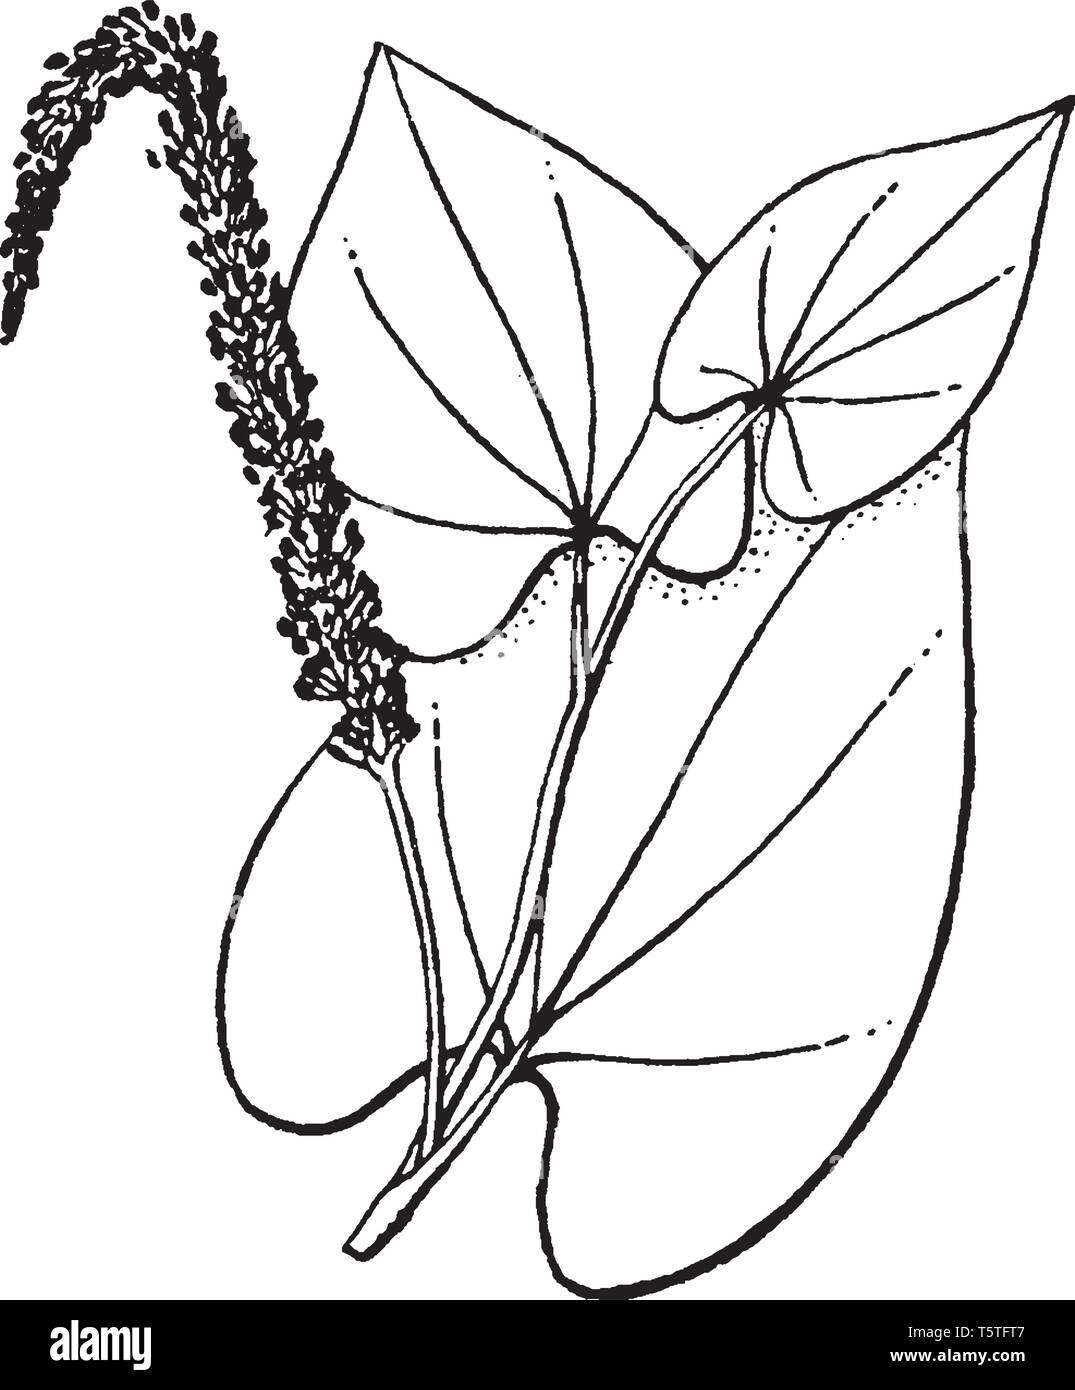 Picture shows the stems of Saururus plant. It is an ornamental plant and is native to eastern North America. Leaves are large in size and are in heart Stock Vector